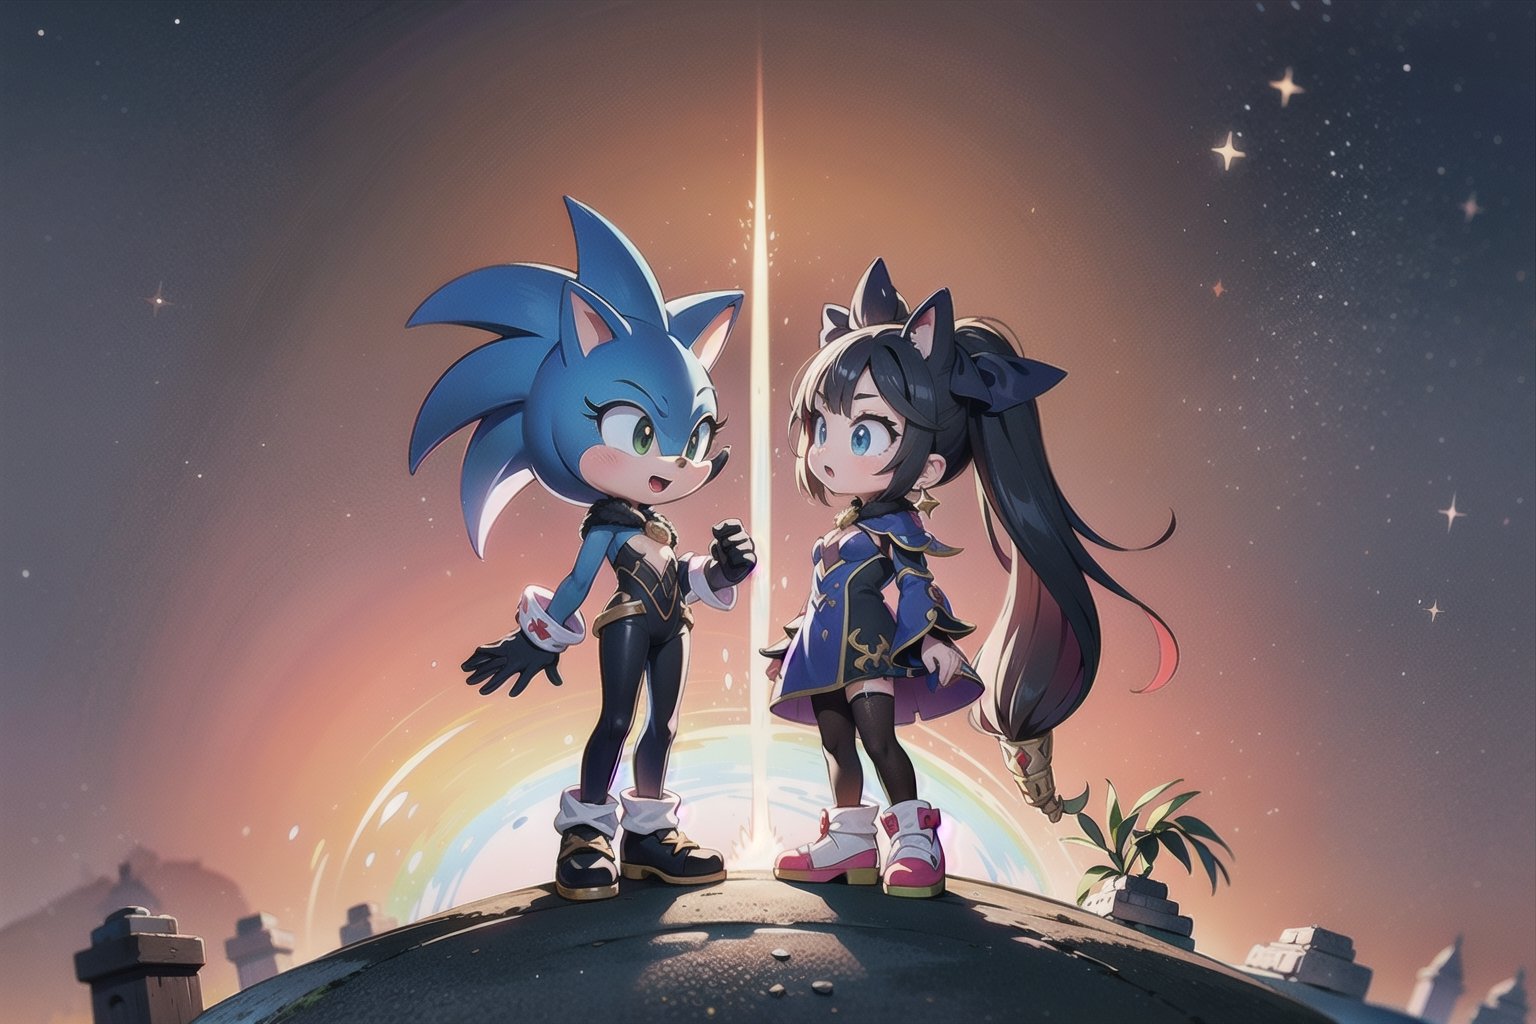 Against the backdrop of the beautiful island of Looney, little Monadef and Sonic the Hedgehog stand defiant, their dark silhouettes etched against a orange sky. Sonic the Hedgehog stands by her side, his blue spikes and red shoes a vivid splash against the dull gray stone. Every detail of their forms is rendered in stunning 32K UHD, as if they might step out of the frame at any moment.